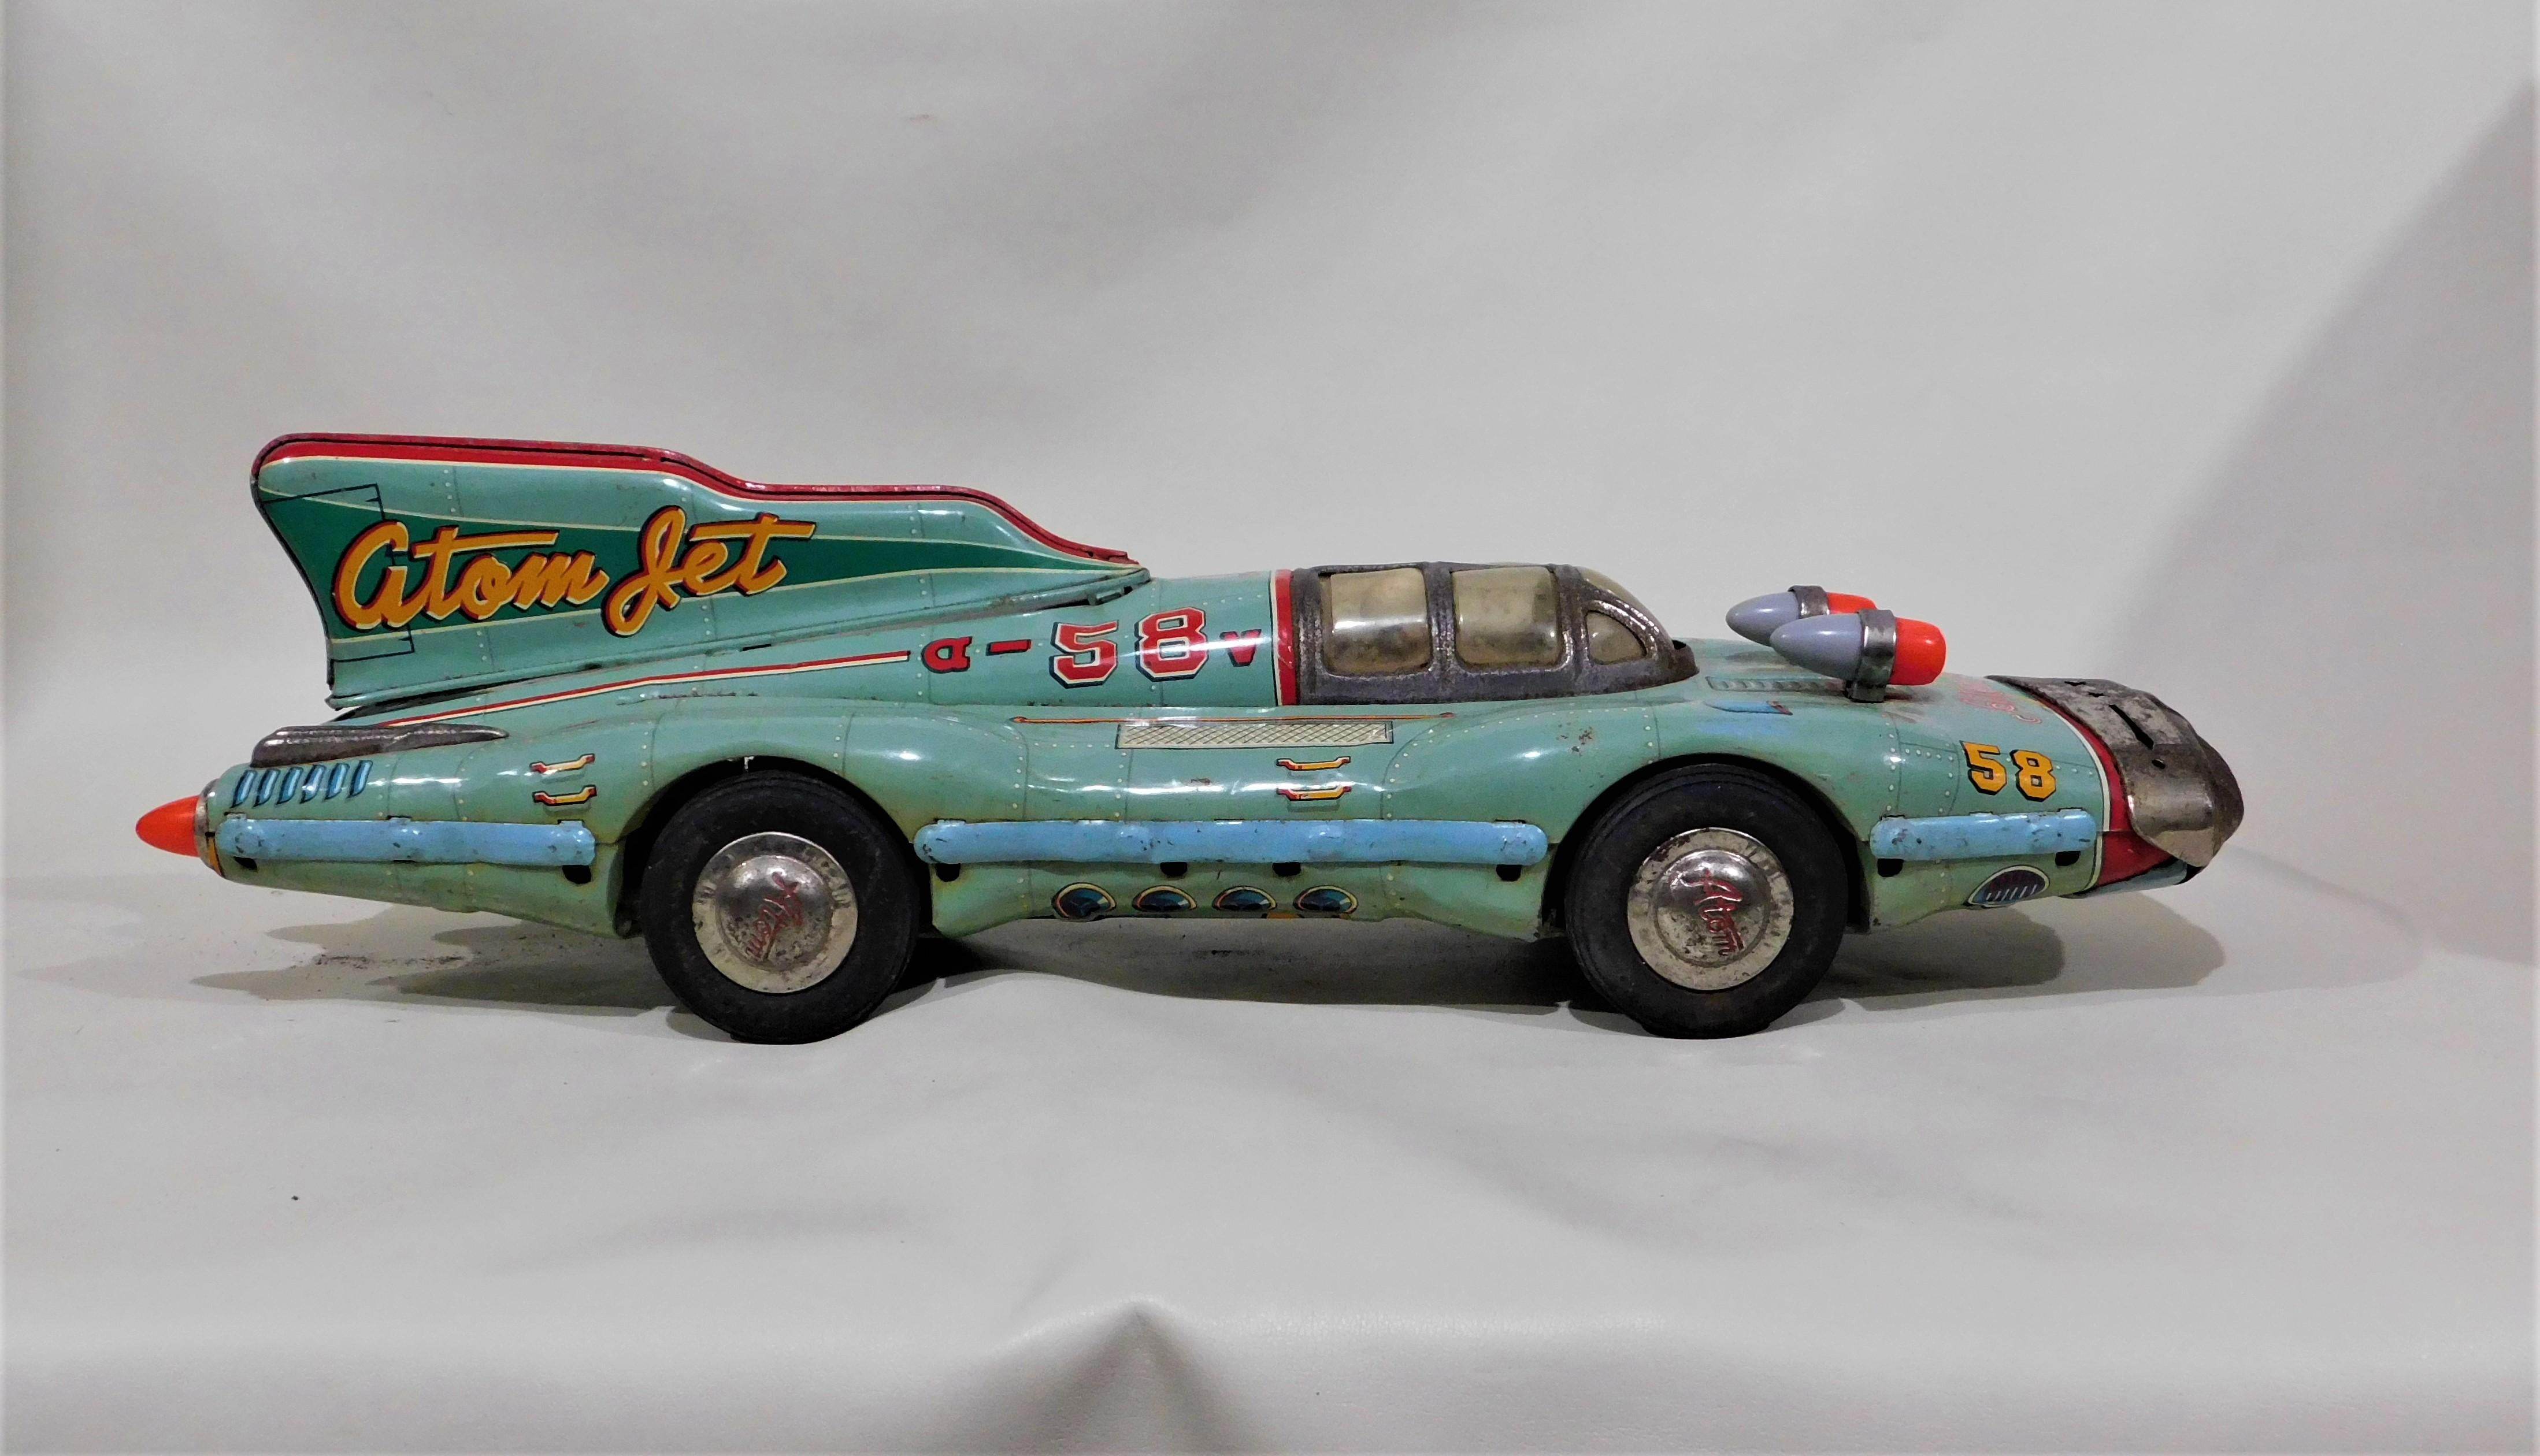 Rare 1950s Atom Jet very large tin litho friction race car made by Yonezawa Japan, over 2 feet long (27 inches).
With its futuristic space age atomic Japanese design, this is one of the most sought after tinplate toys, with all original parts, top